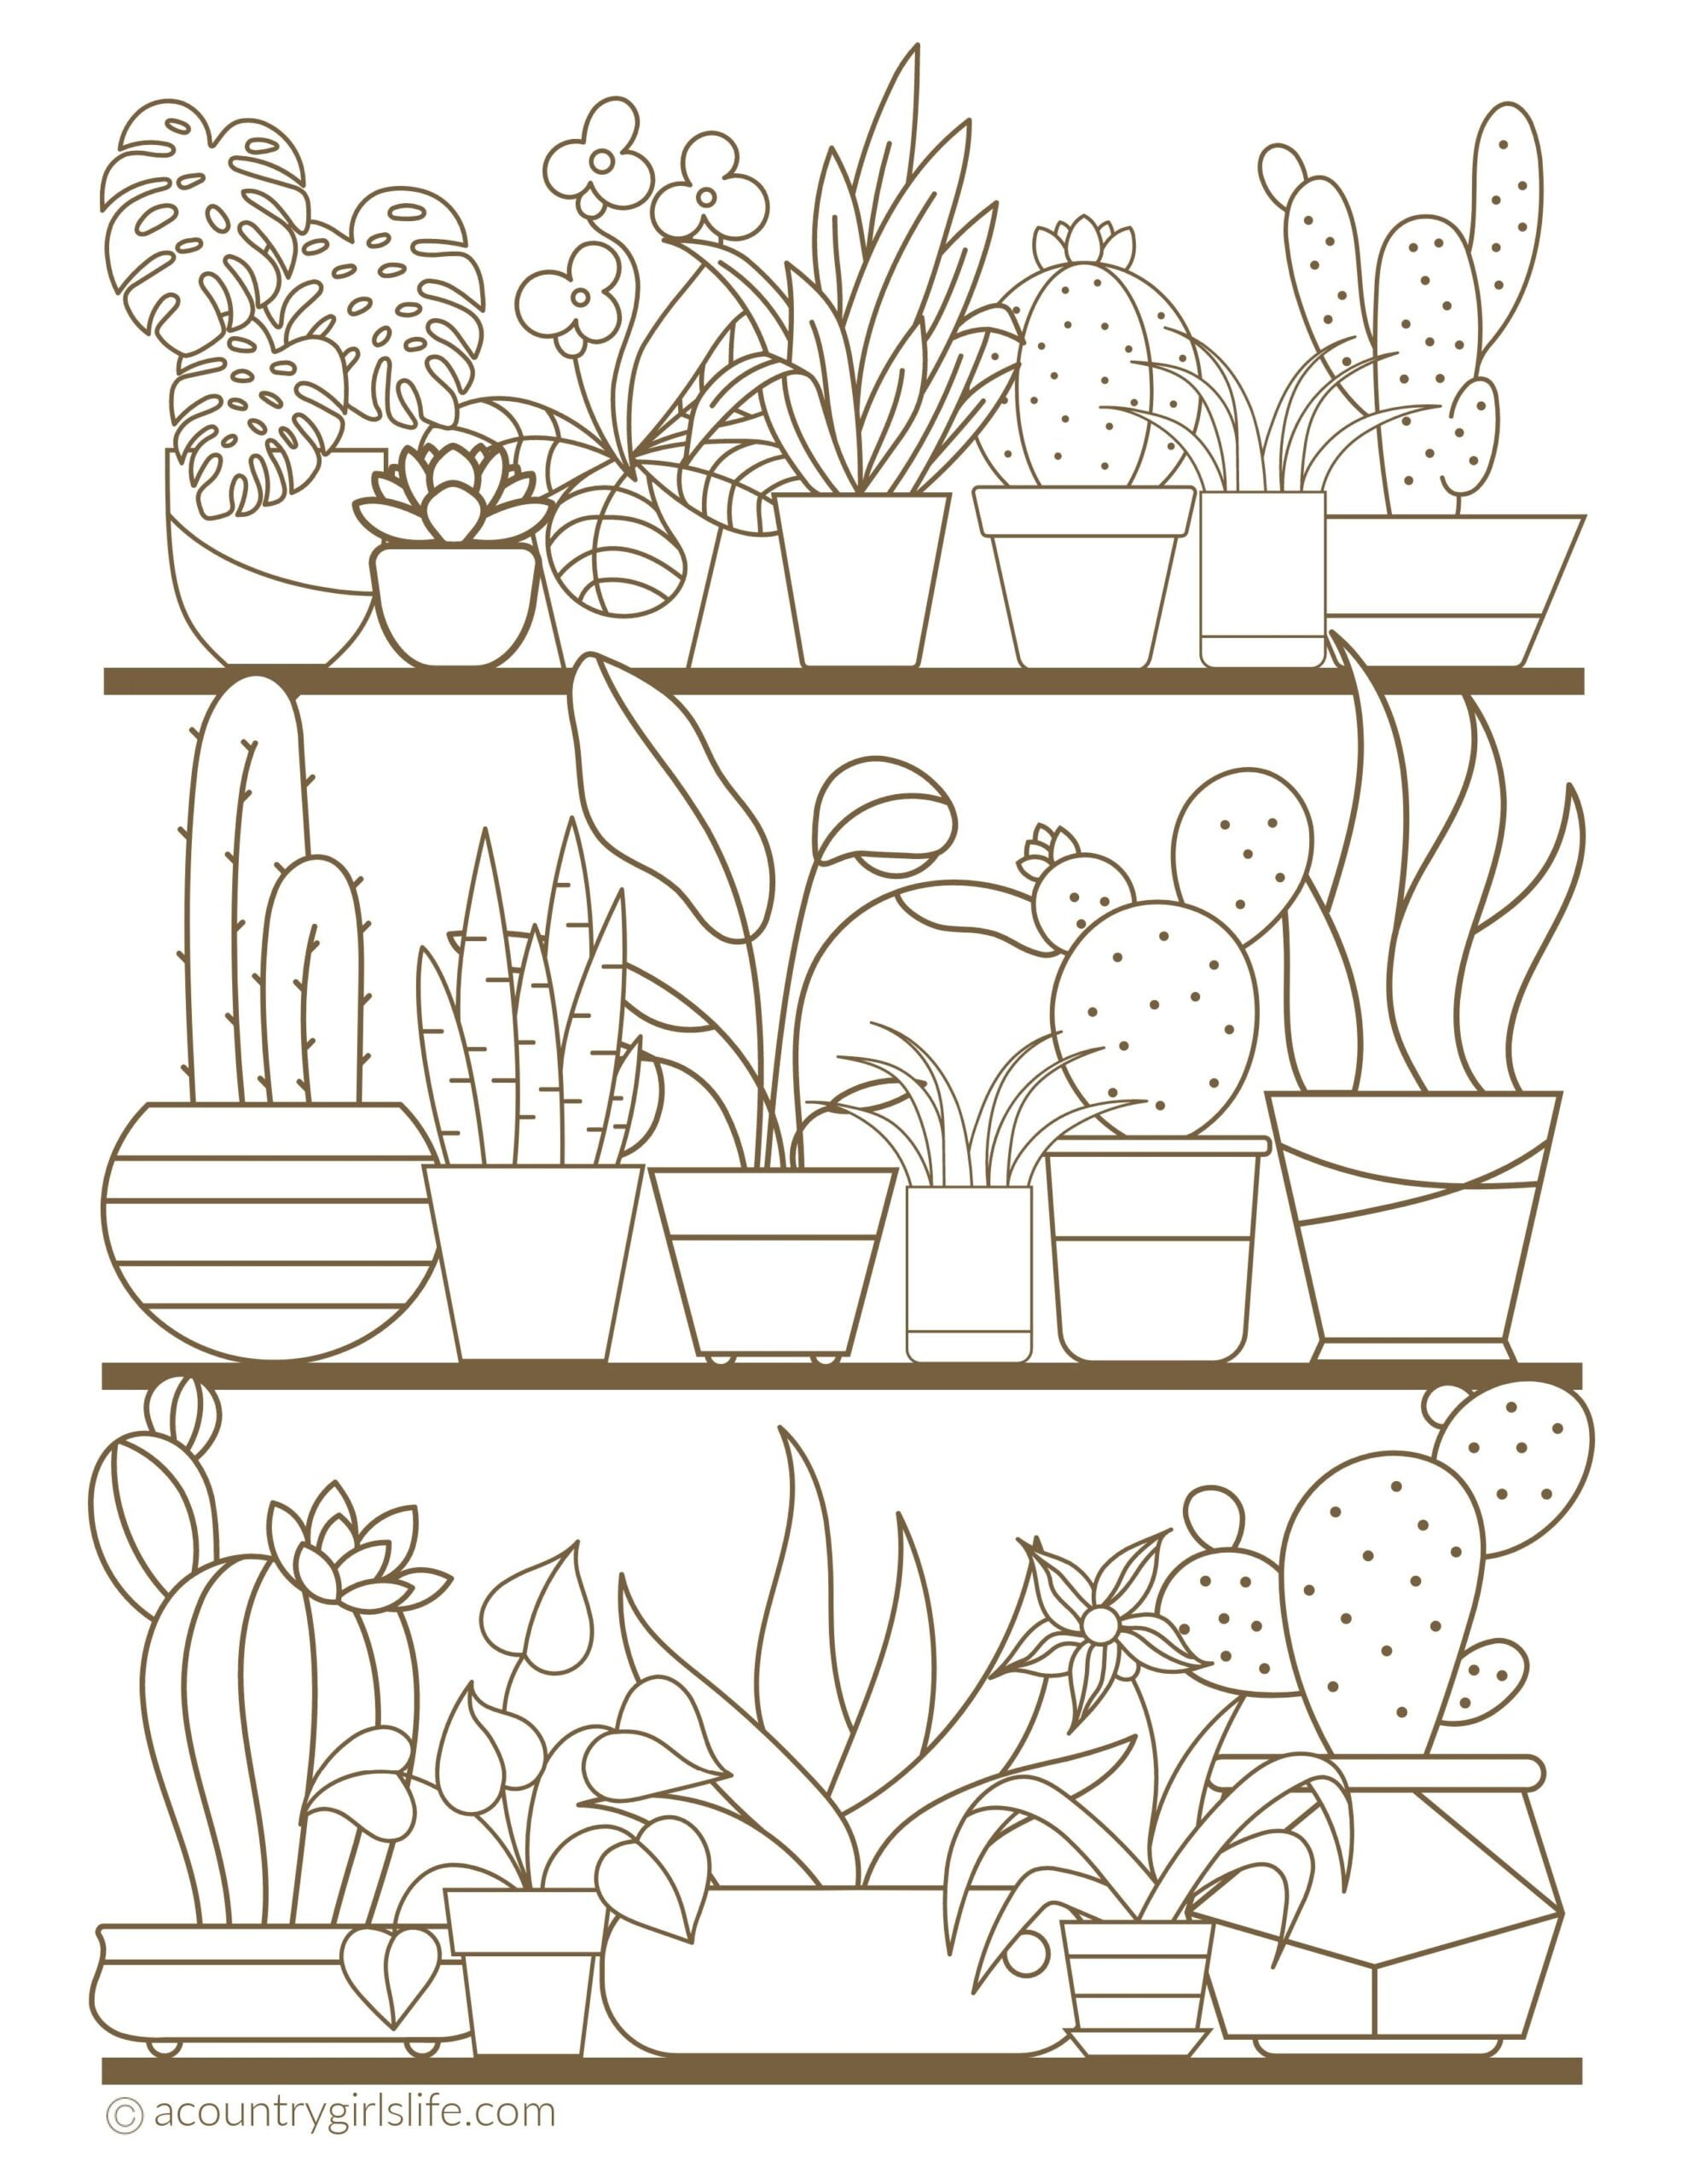 Pin On FREE Printable Coloring Pages 